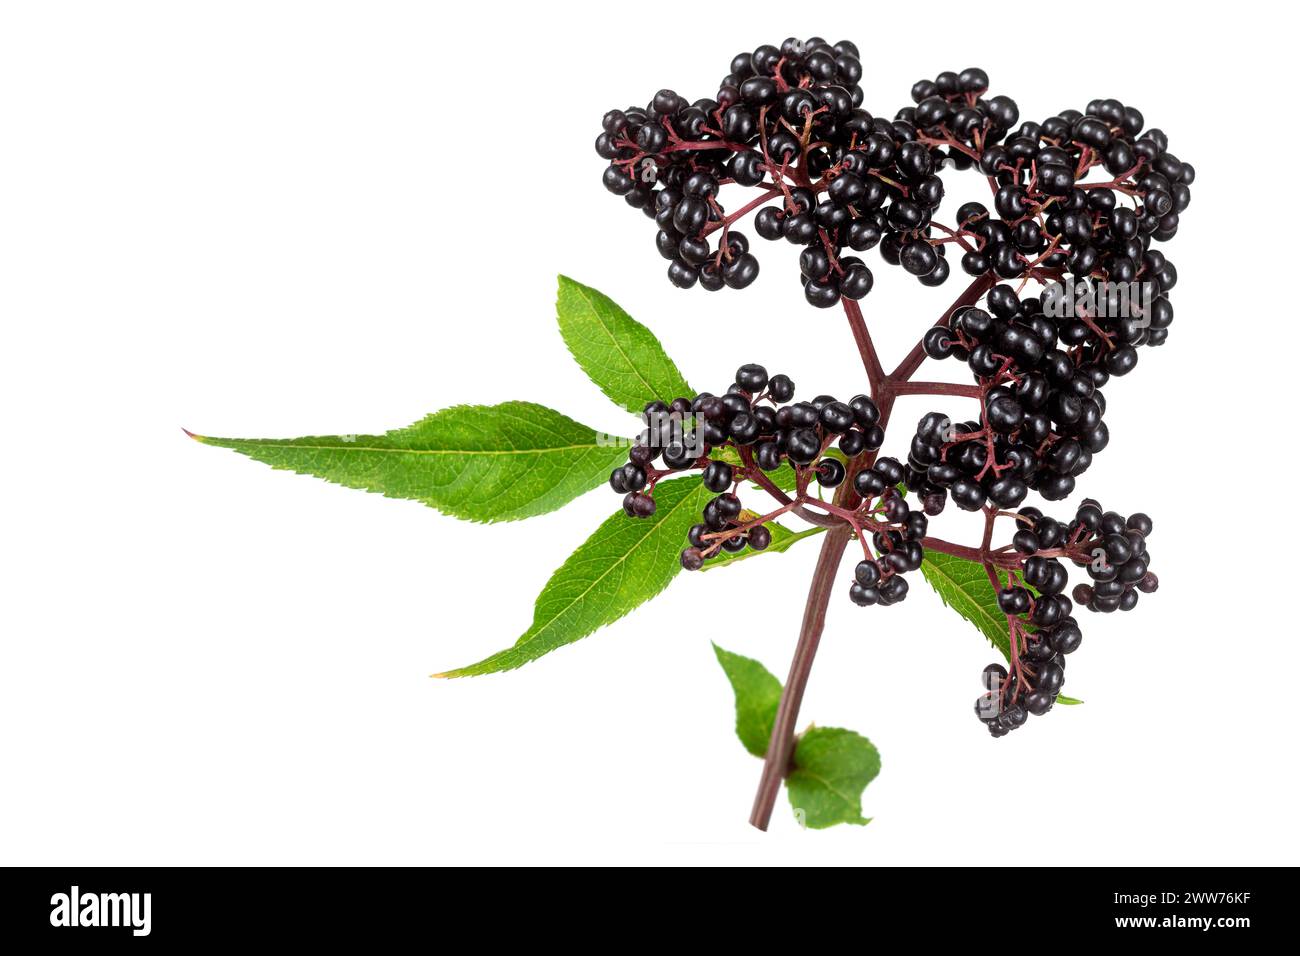 Sambucus ebulus, elderberry with erect and toxic fruits, the rest of the plant contains medicinal uses. Stock Photo